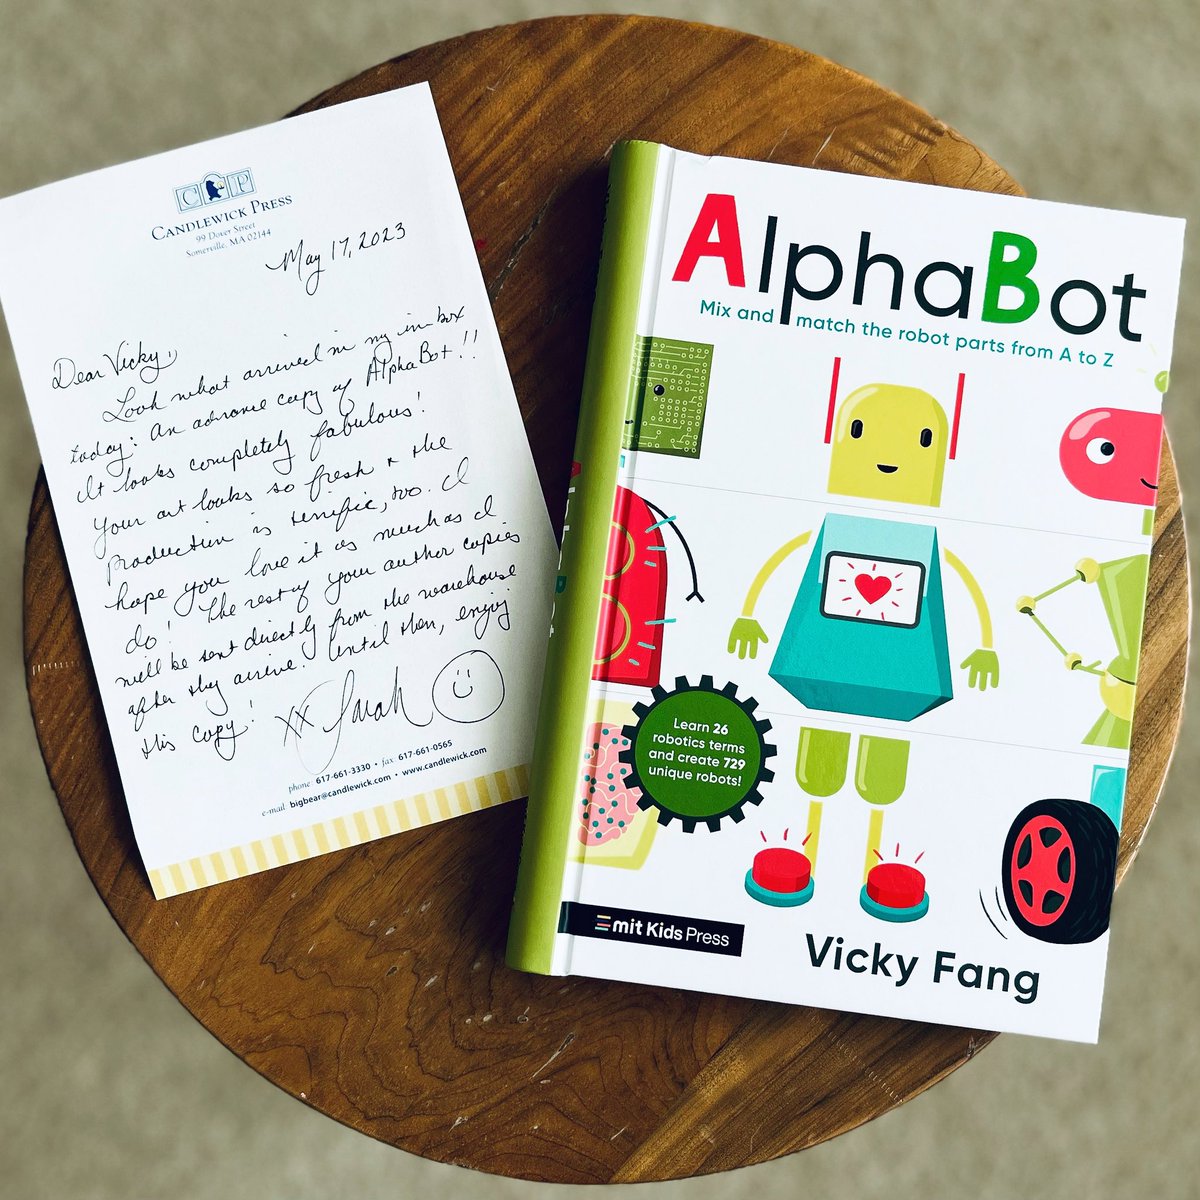 I just got a few ALPHABOT ARCs! ARC-sharing groups, hit me up if you want a copy! (I only have three, so be fast!)
#BookExcursion #BookExpedition #BookJourney #BookPosse #BookSojourn #BookSquad #collaBOOKation #LitReviewCrew #kidlitexchange #BookAllies